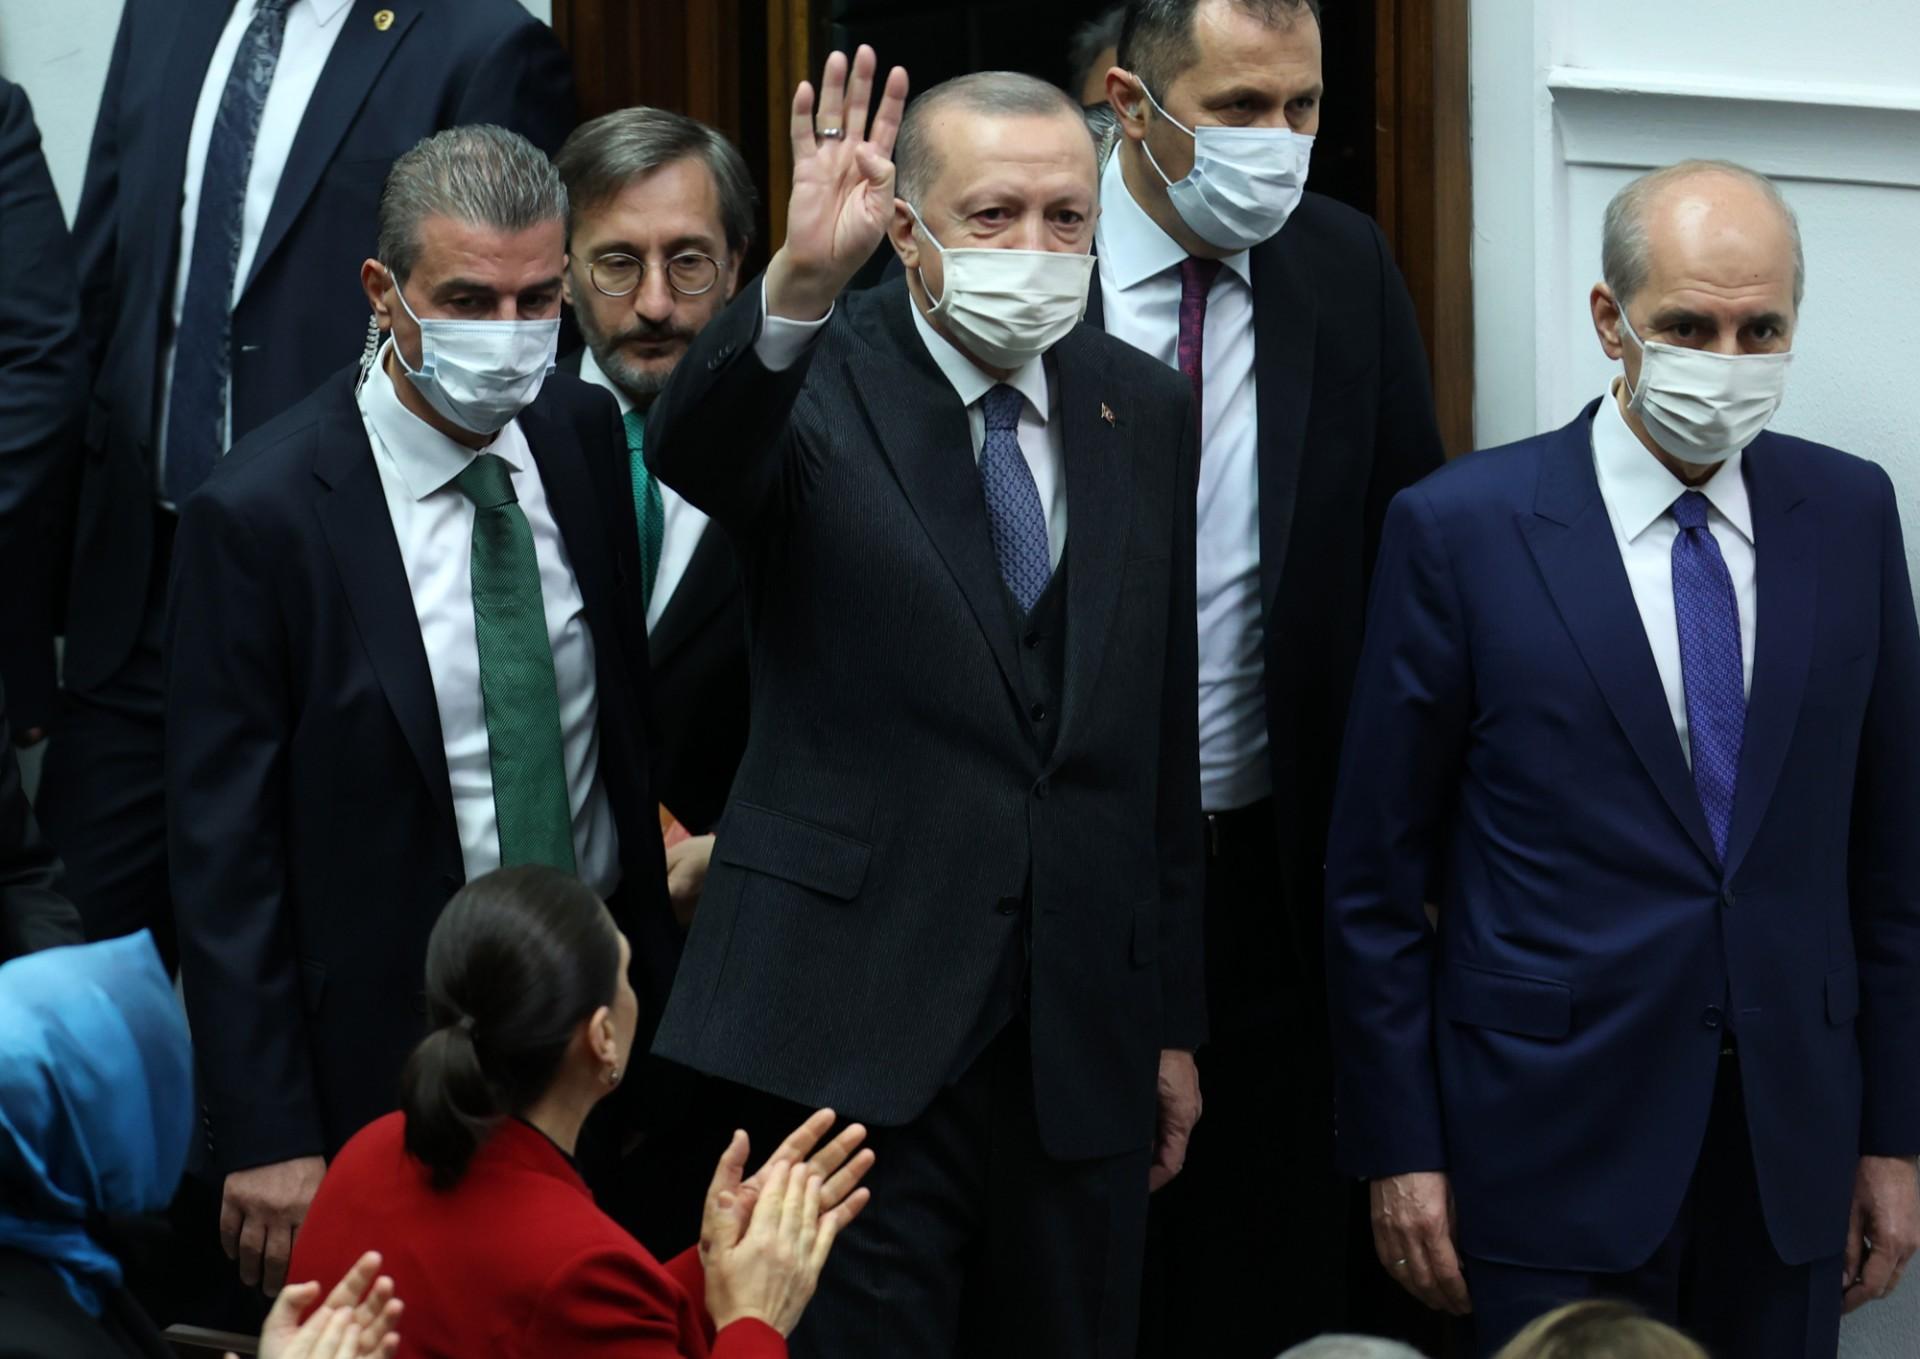 Turkey President Recep Tayyip Erdogan waves as he arrives to give a speech during a party parliamentary group meeting at the Grand National Assembly of Turkey in Ankara, on April 20. Photo: AFP